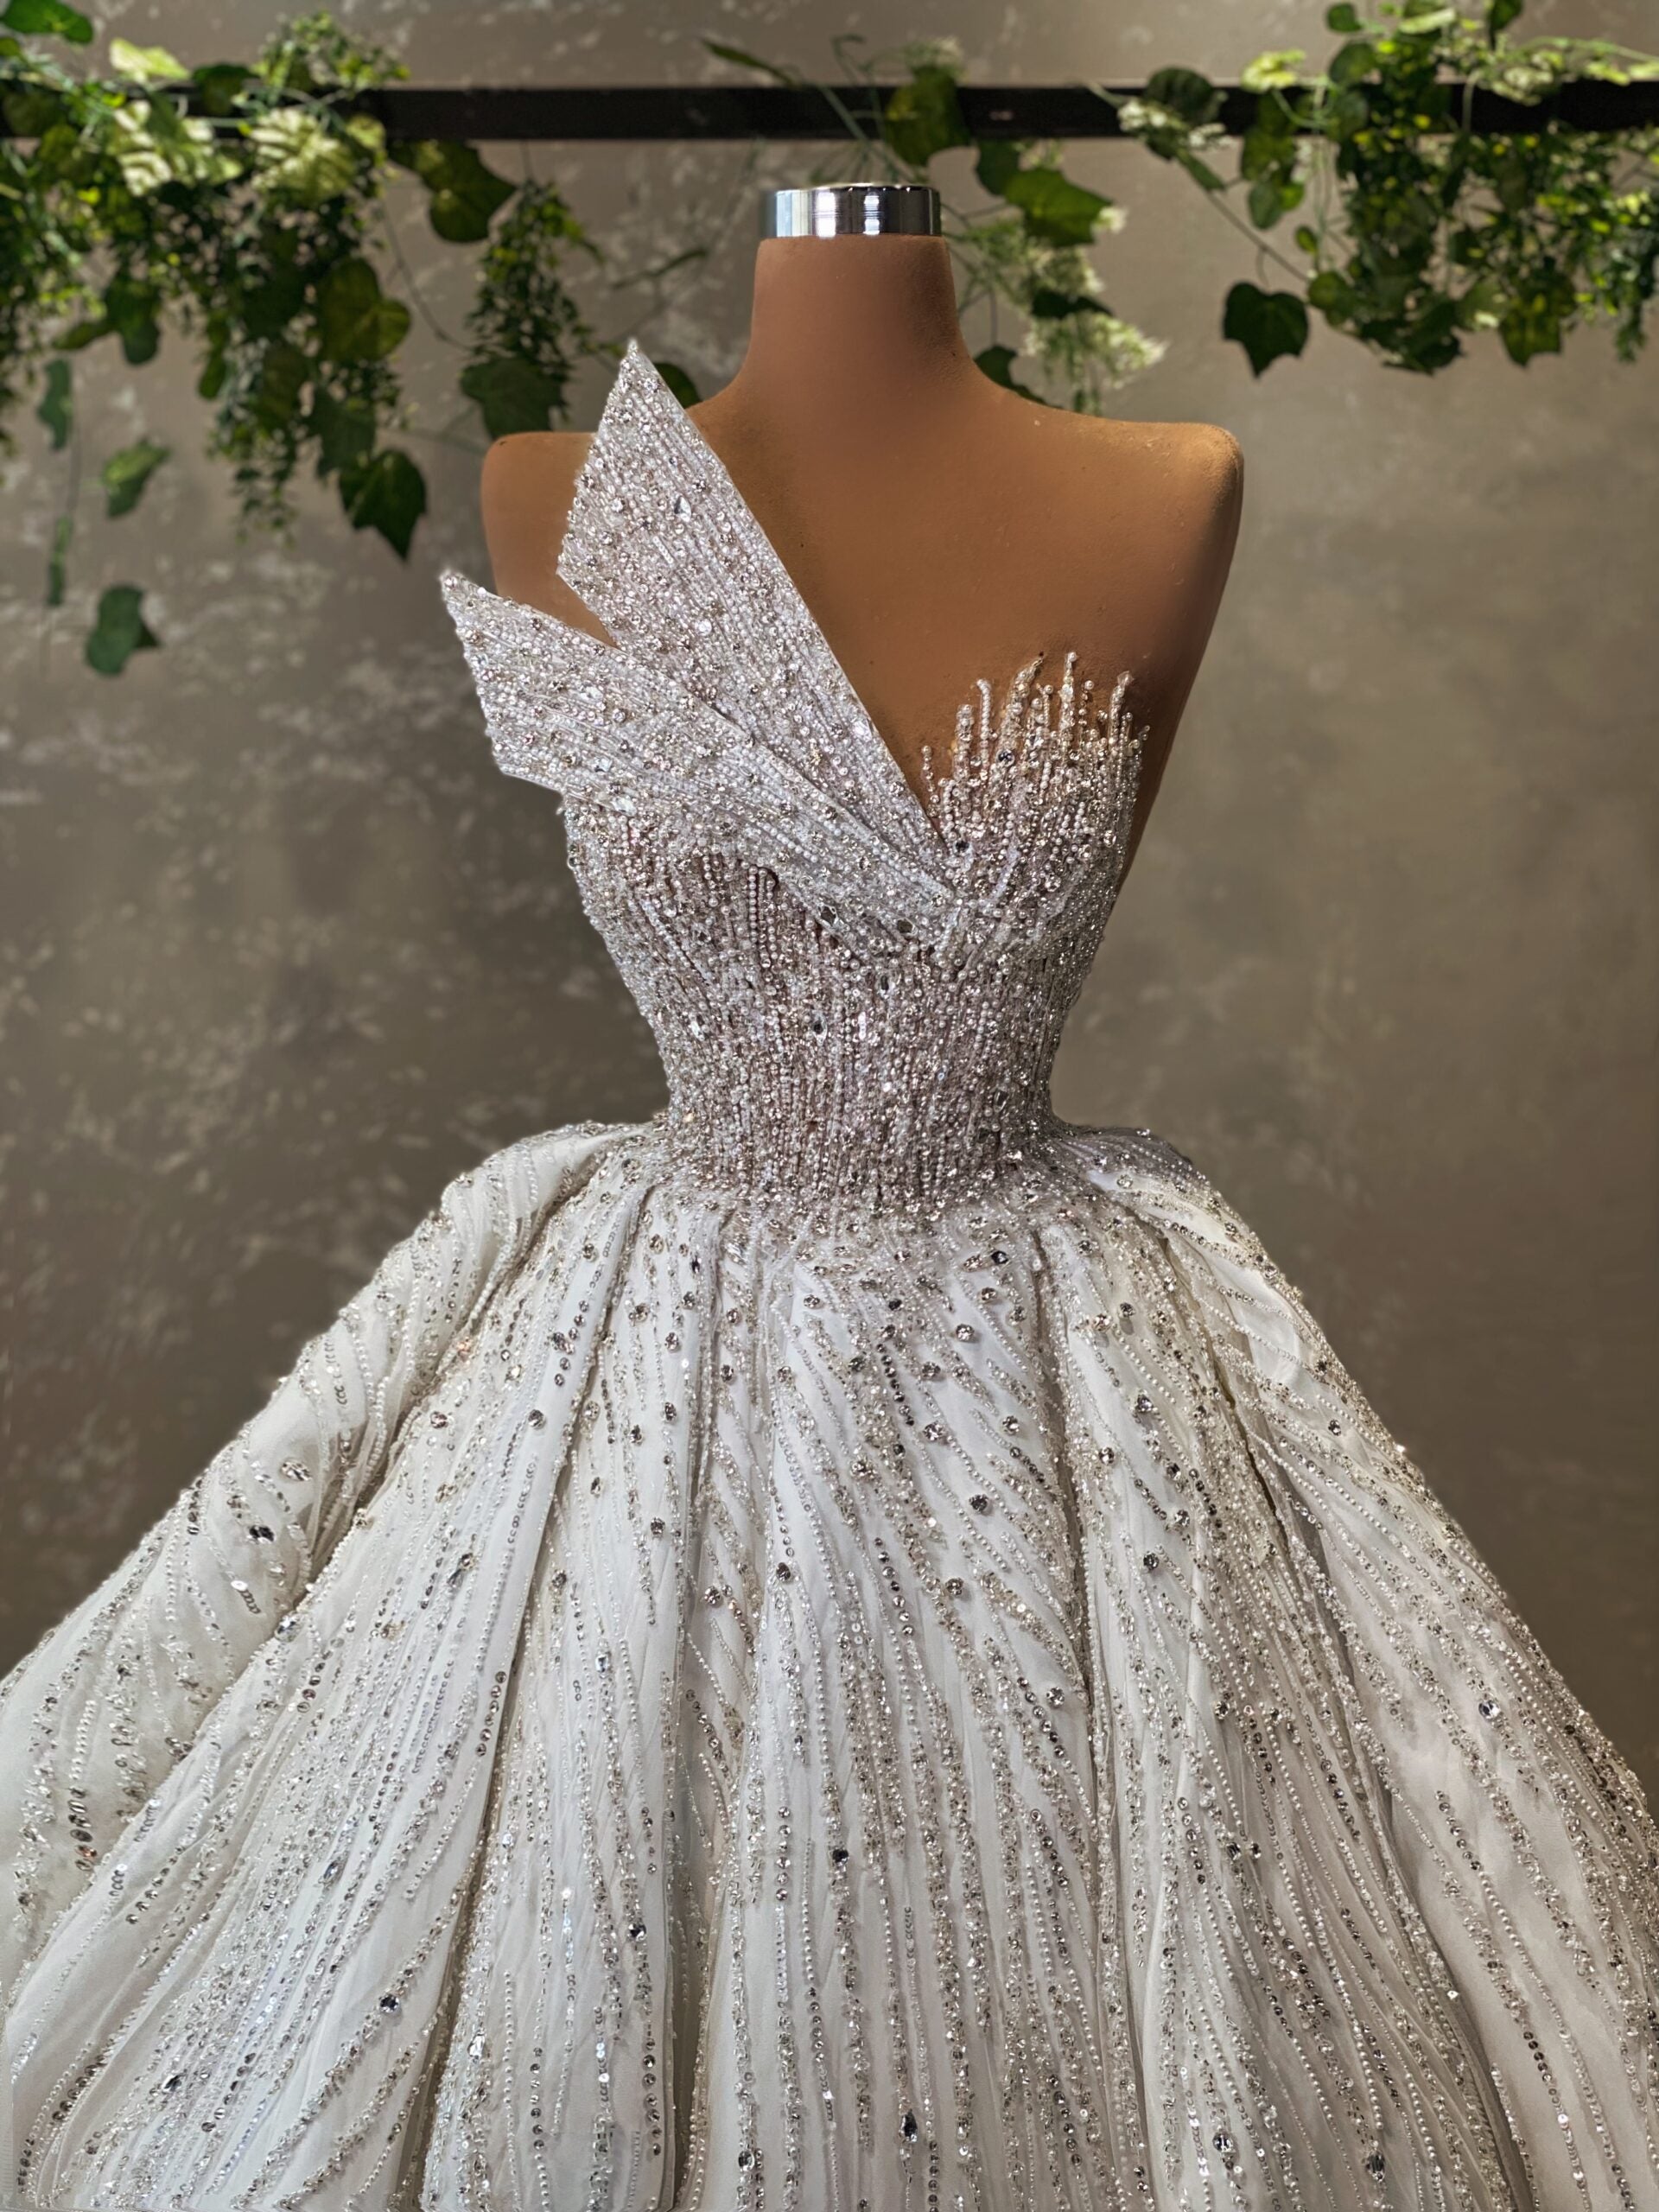 Custom Made High Neck Two Piece Evening Gown With Short Capped Sleeves,  Front Split, And Sweep Train Special Design For Prom And Formal Events From  Yateweddingdress, $111.38 | DHgate.Com